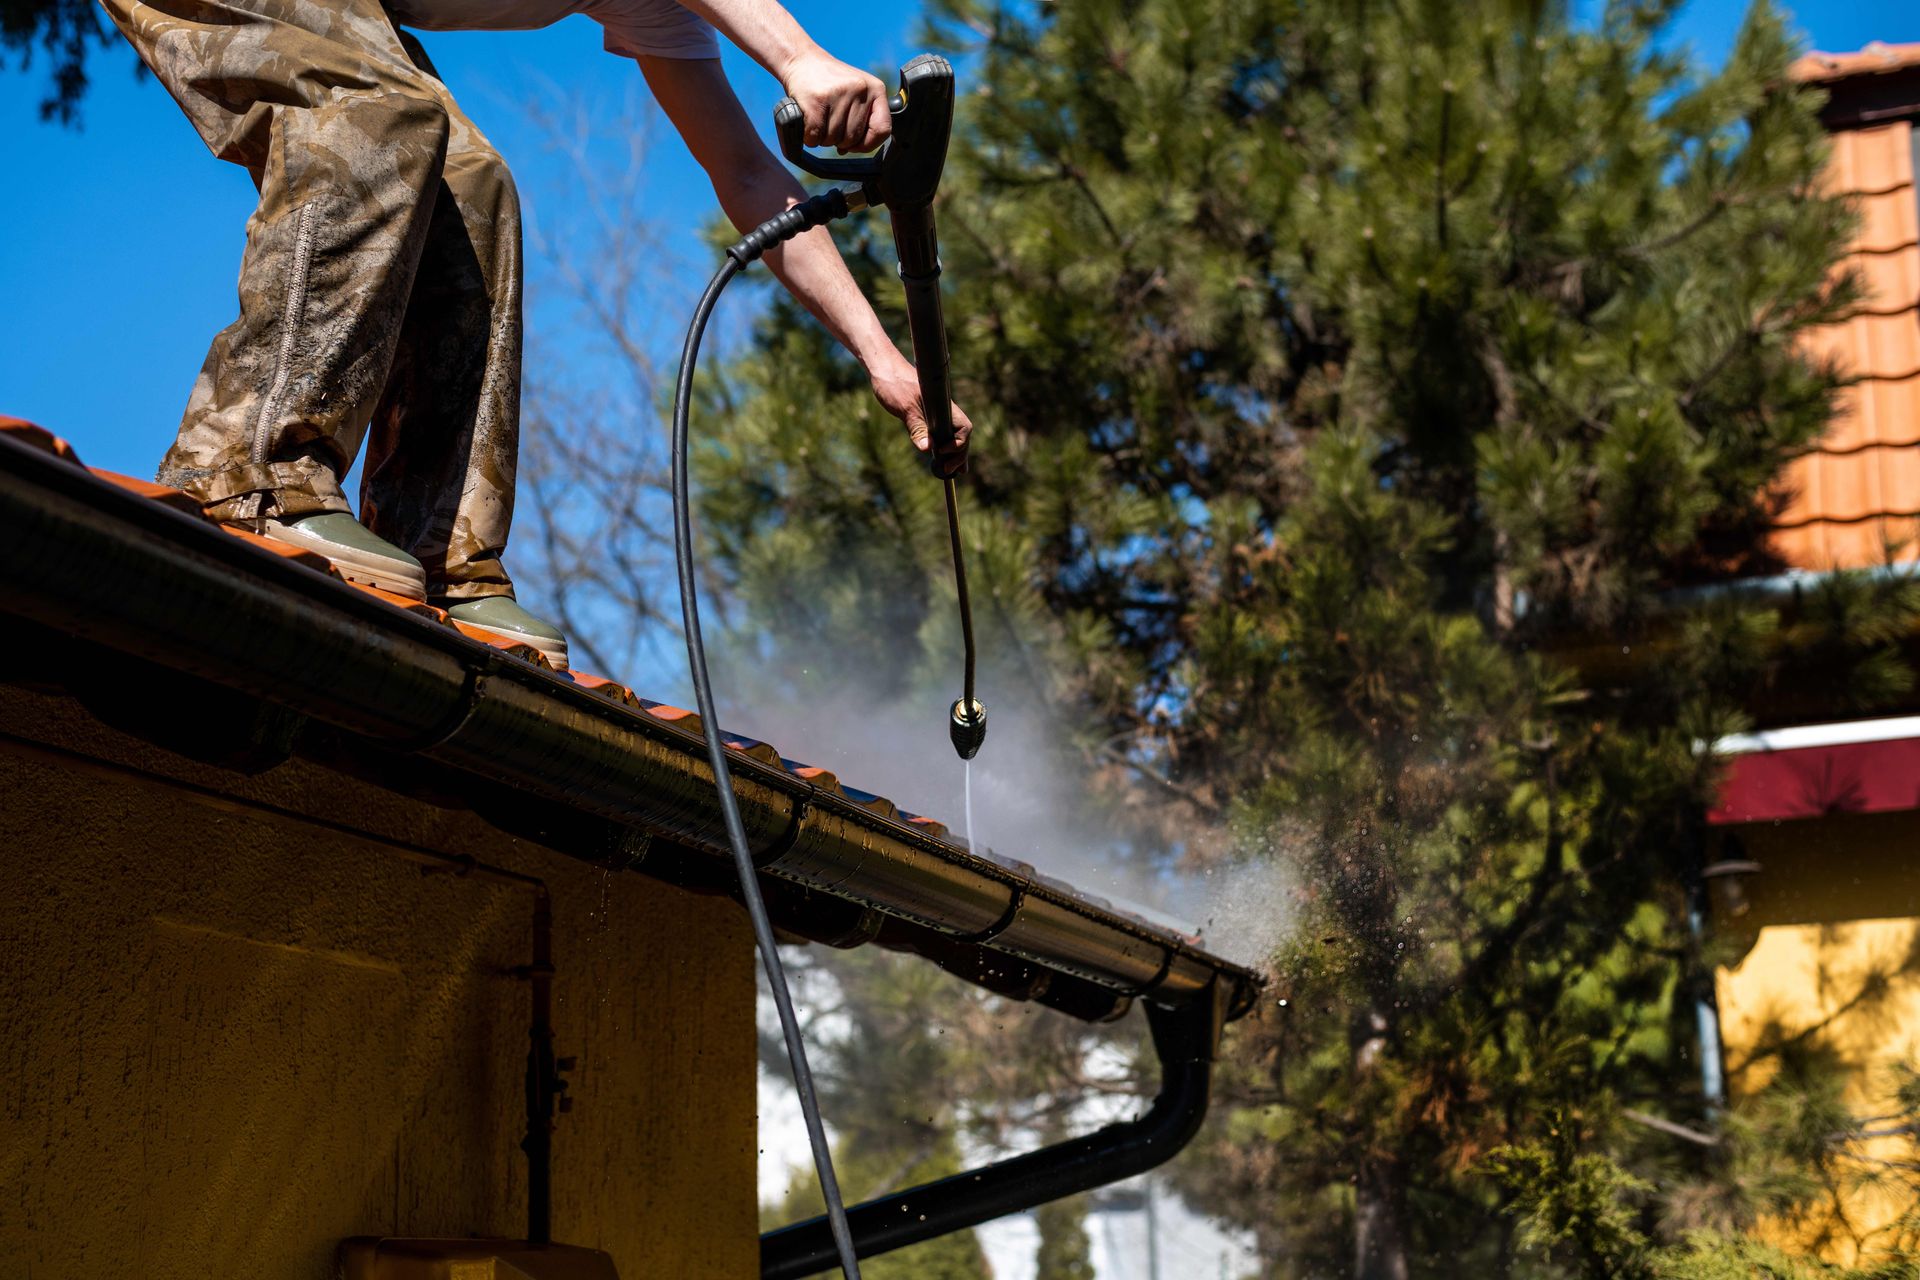 A man is cleaning the roof of a house with a high pressure washer